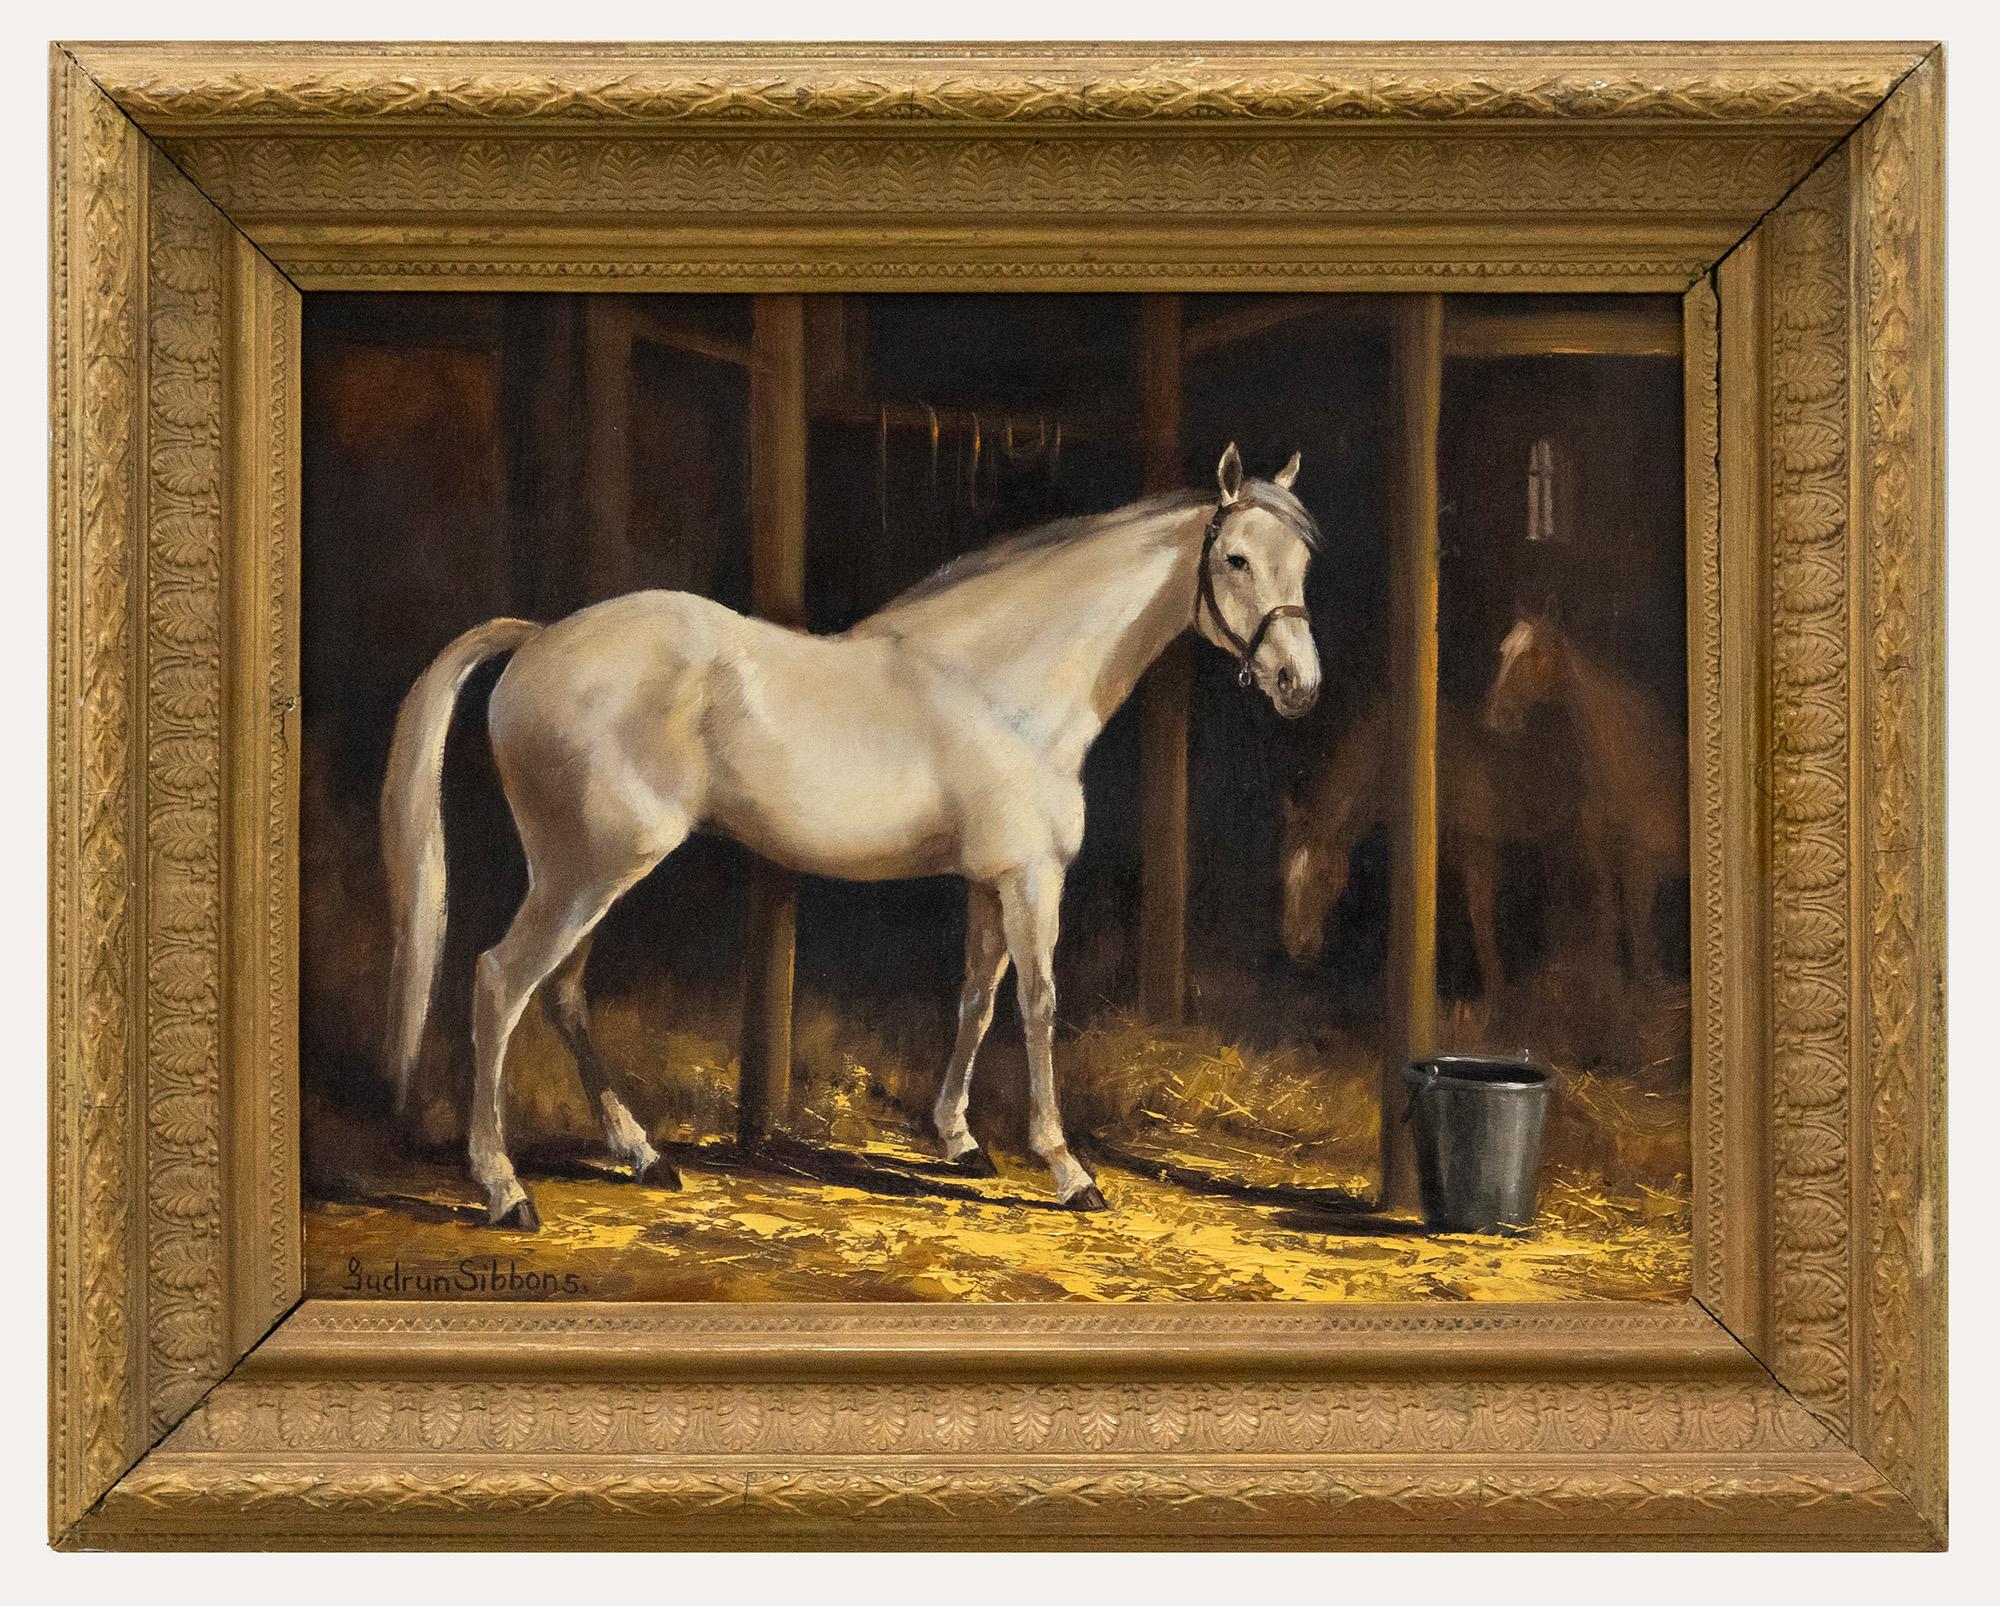 Unknown Animal Painting - Barbara Gudrun Sibbons (b.1925) - 20th Century Oil, Grey Horse in a Stable